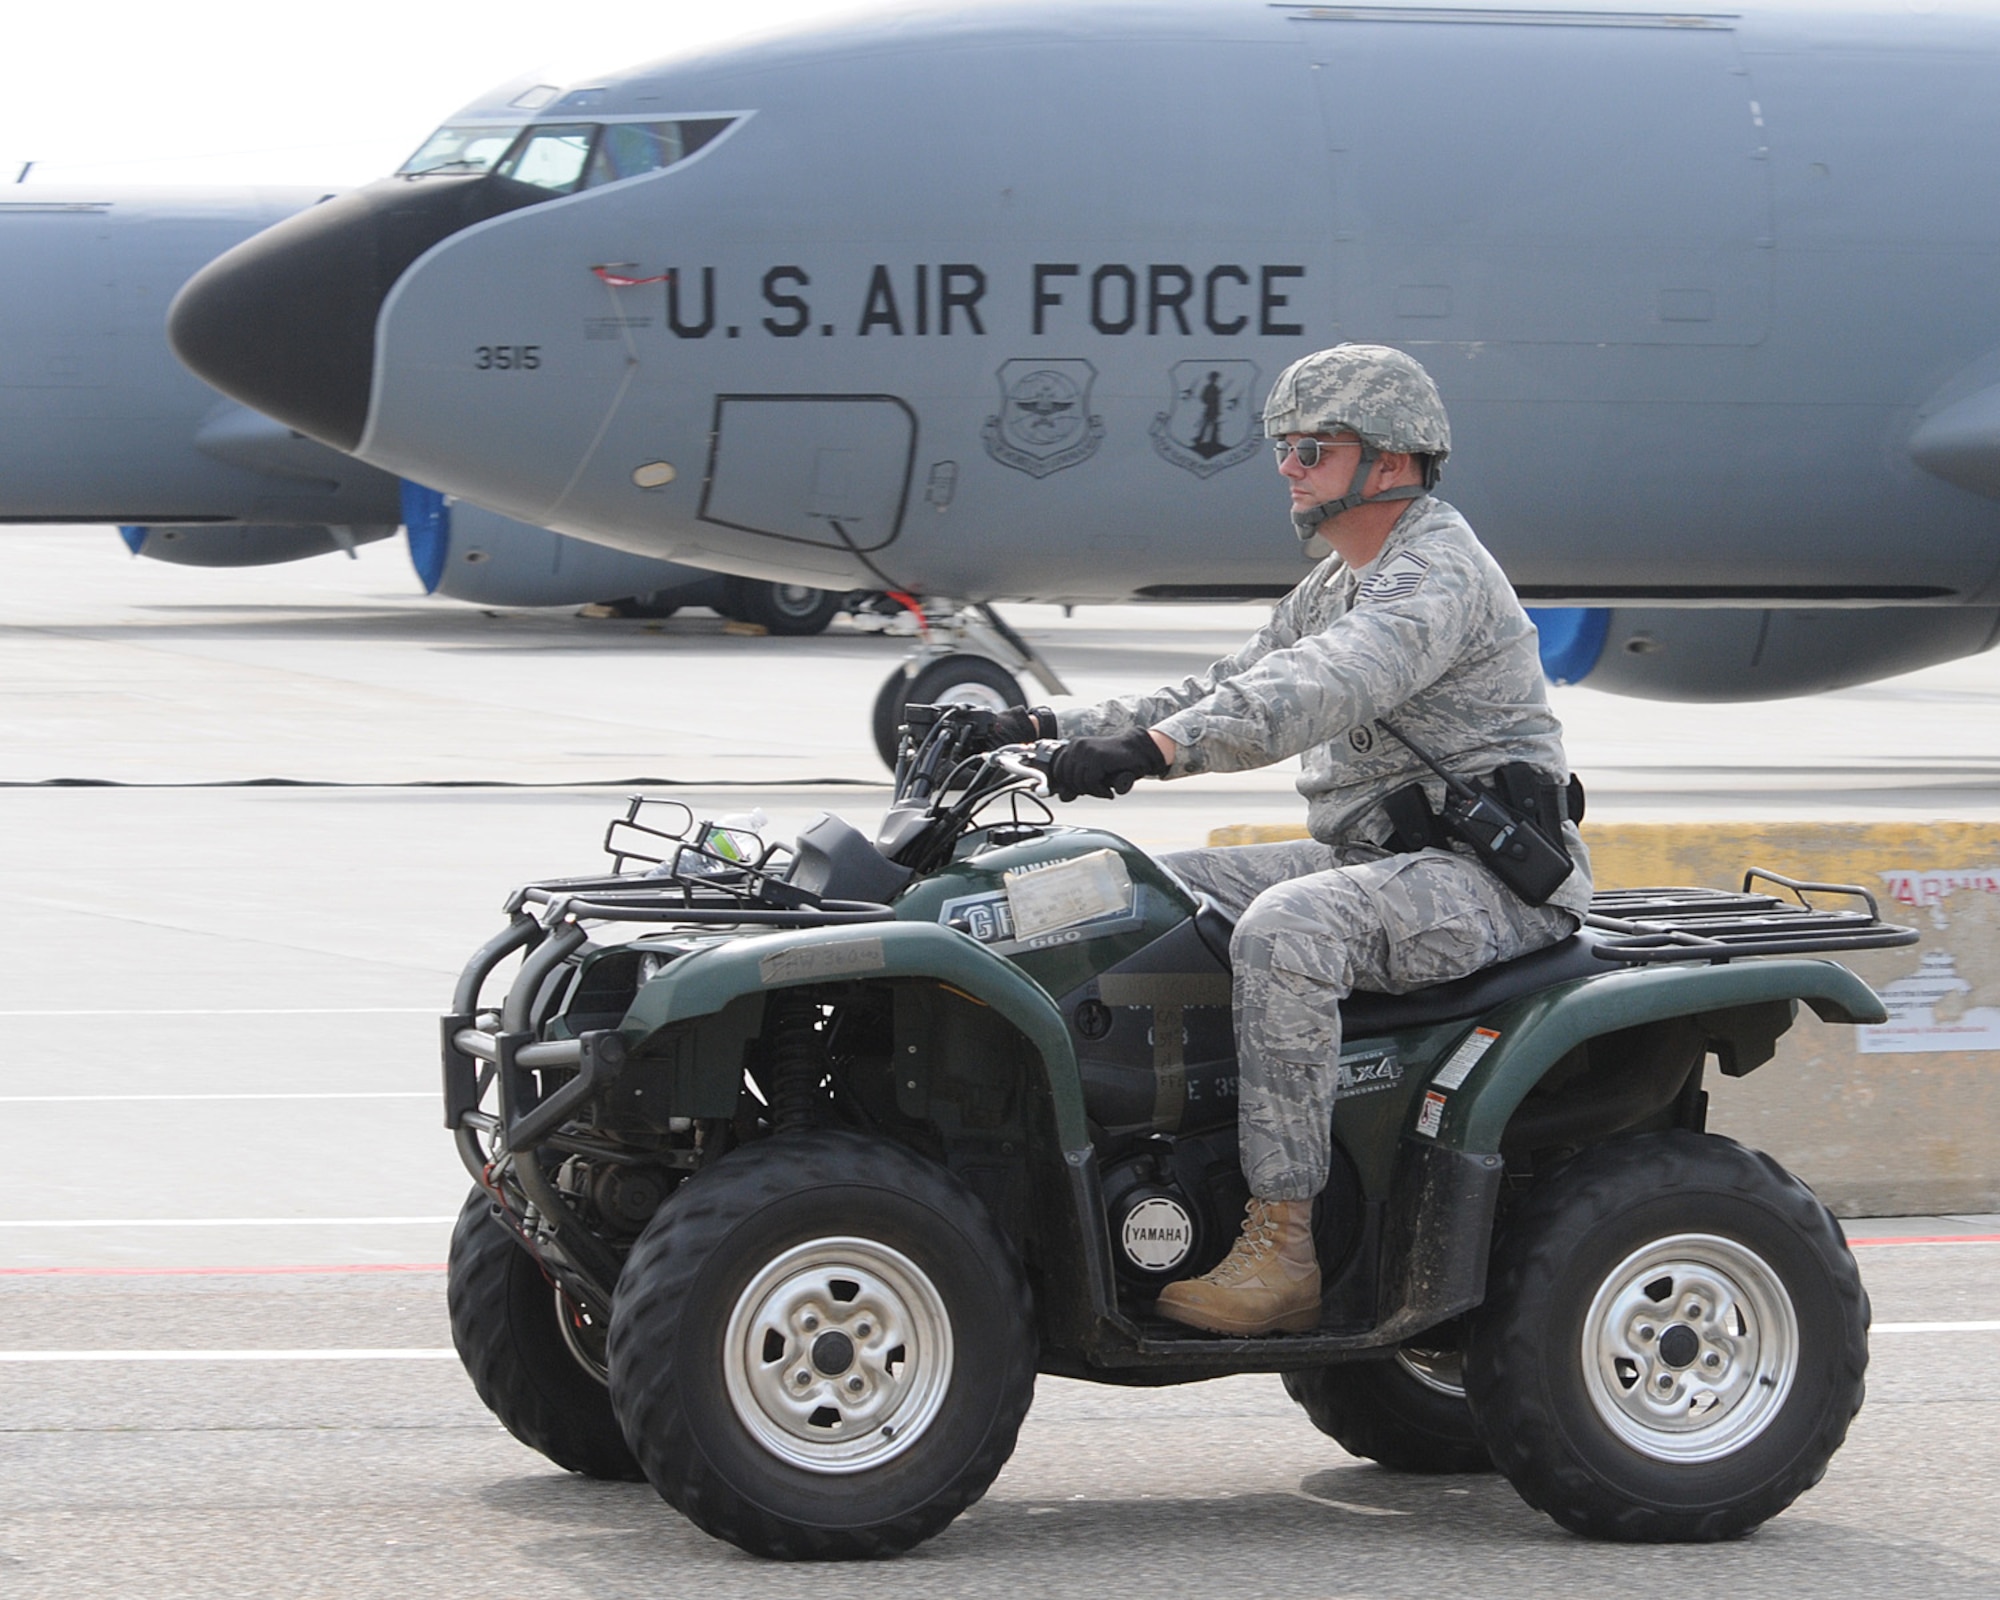 In this photo from August 2011, Chief Master Sergeant Michael P. Sullivan, then a senior master sergeant, rides an All-Terrain Vehicle along the flightline during a base readiness exercise on base. Sullivan, the 157th Security Forces Squadron manager, is scheduled to retire Oct. 1 during a ceremony Sept. 7 at 3:30 p.m. in Building 264urtis Lenz/Released)